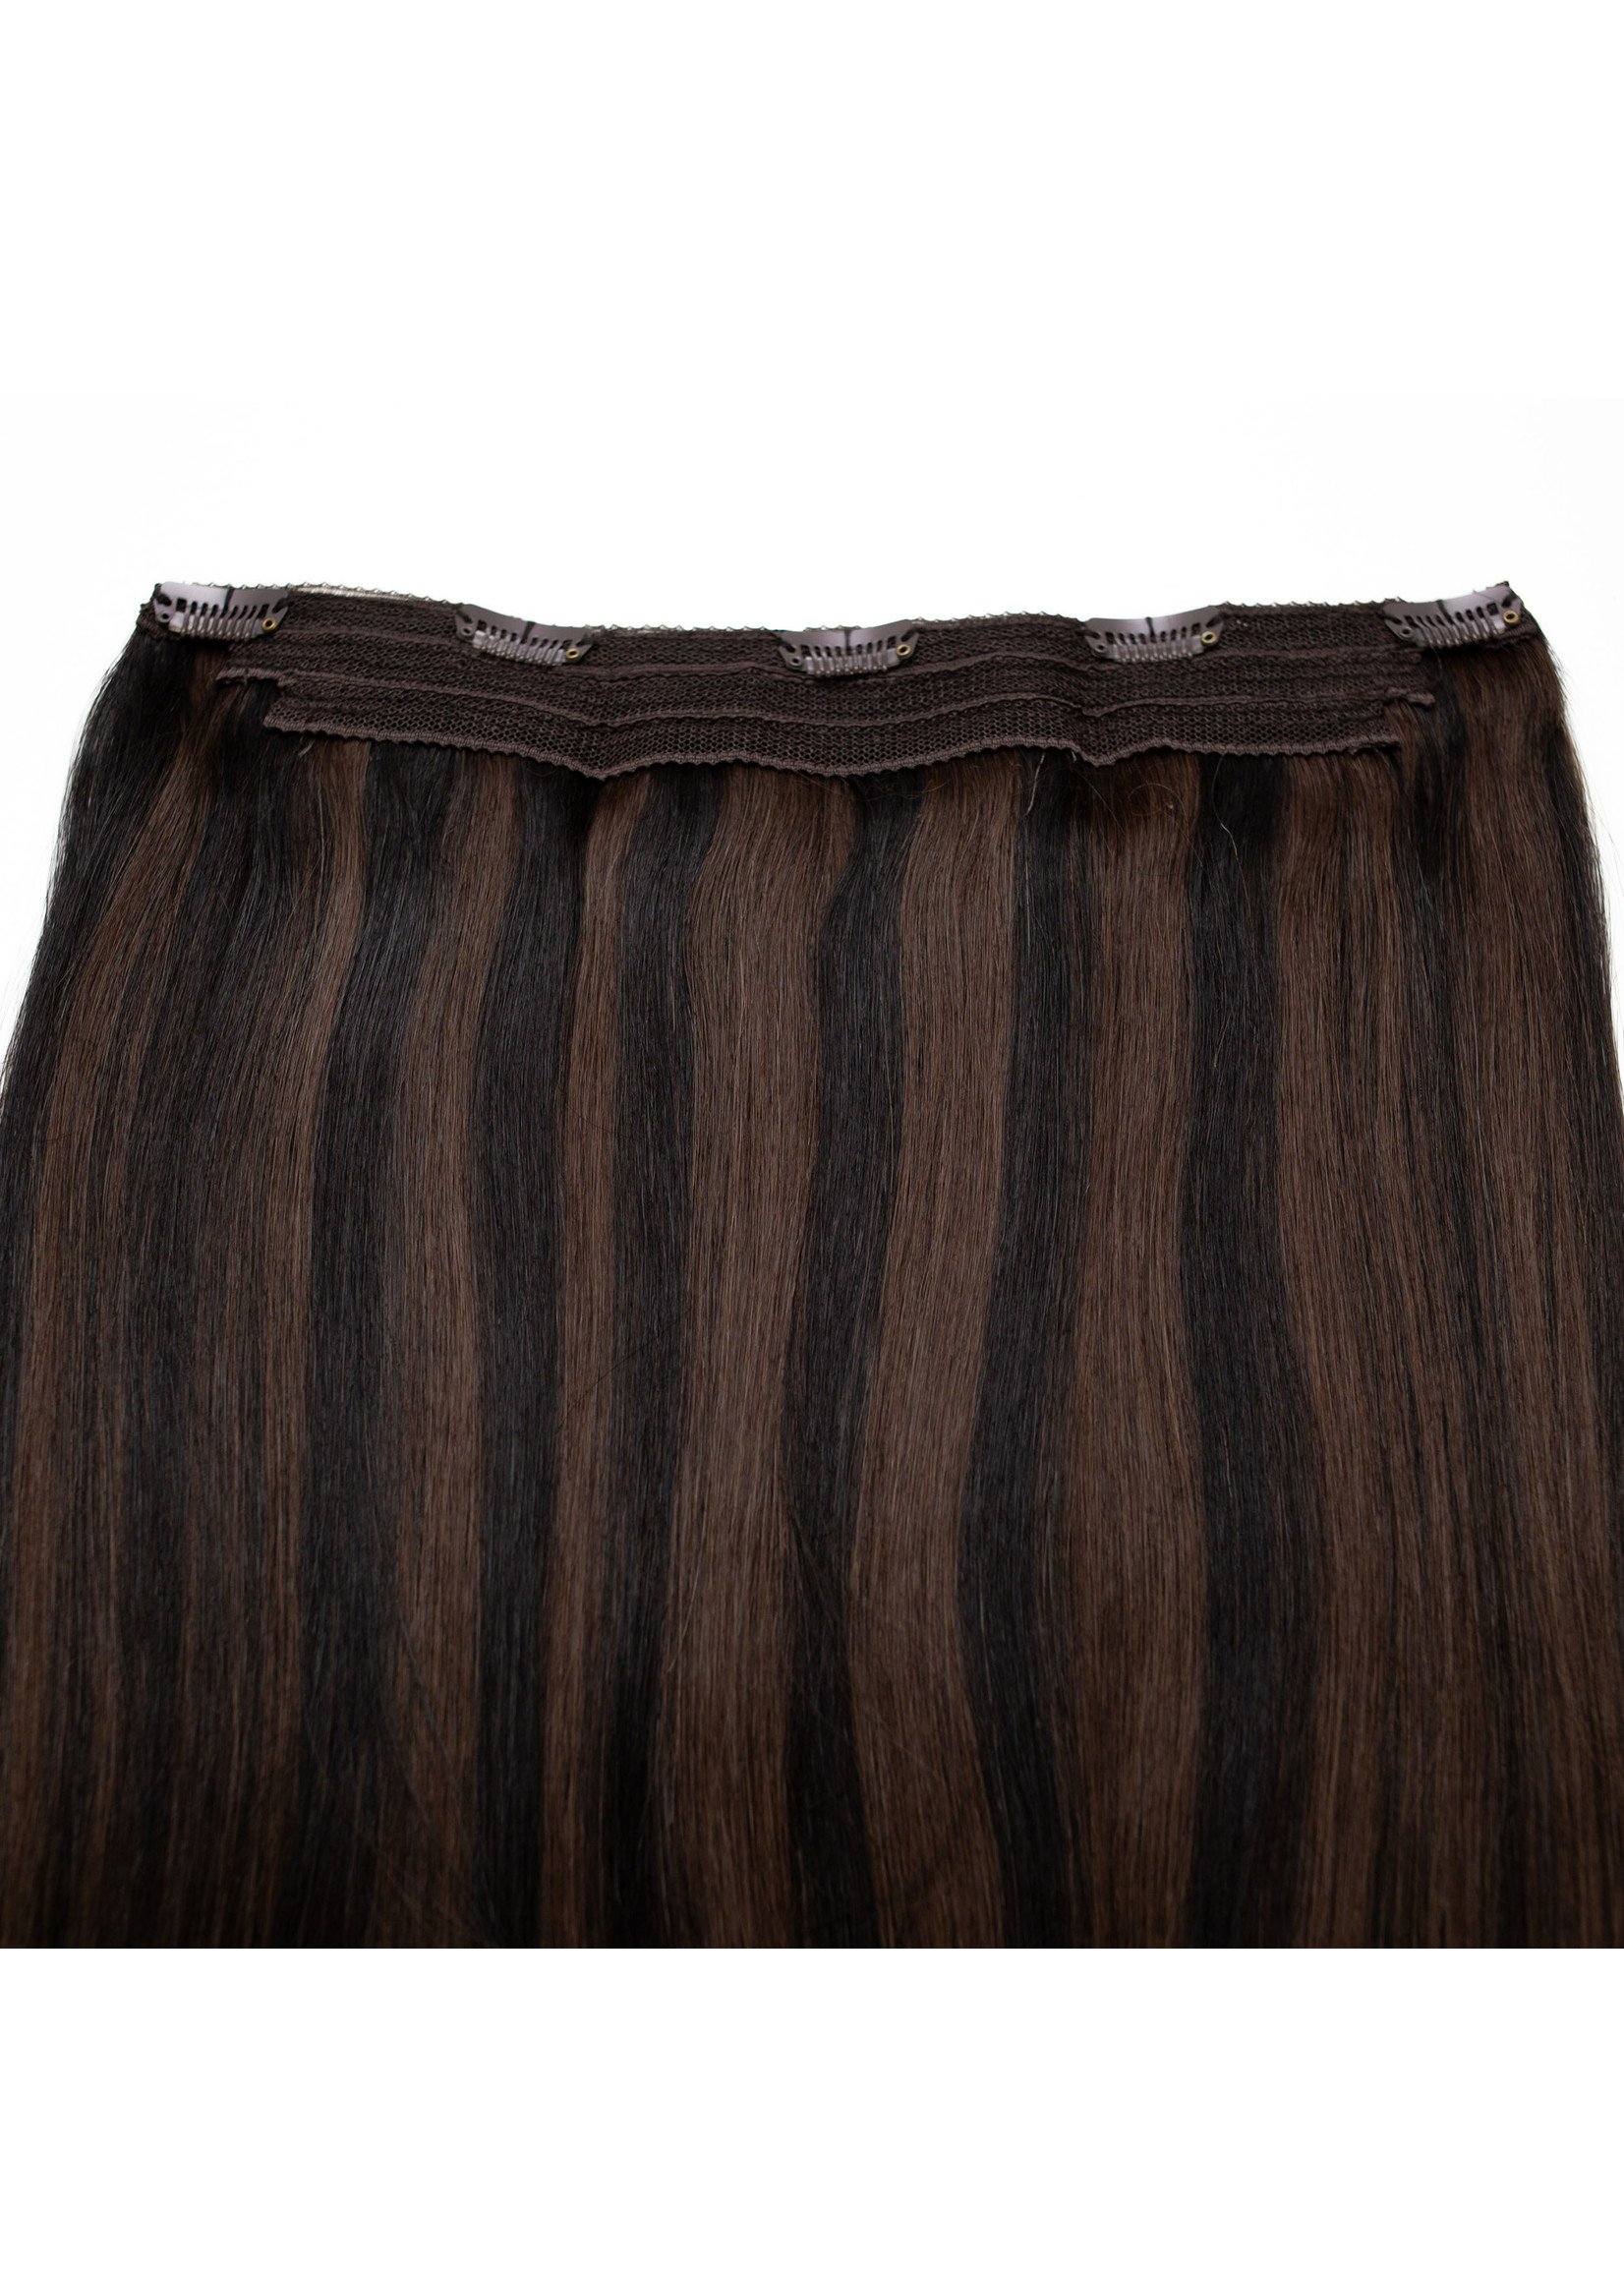 Seamless1 Seamless1 Human Hair Clip-in 1pc Hair Extensions 21.5 Inches - Ritzy Blend